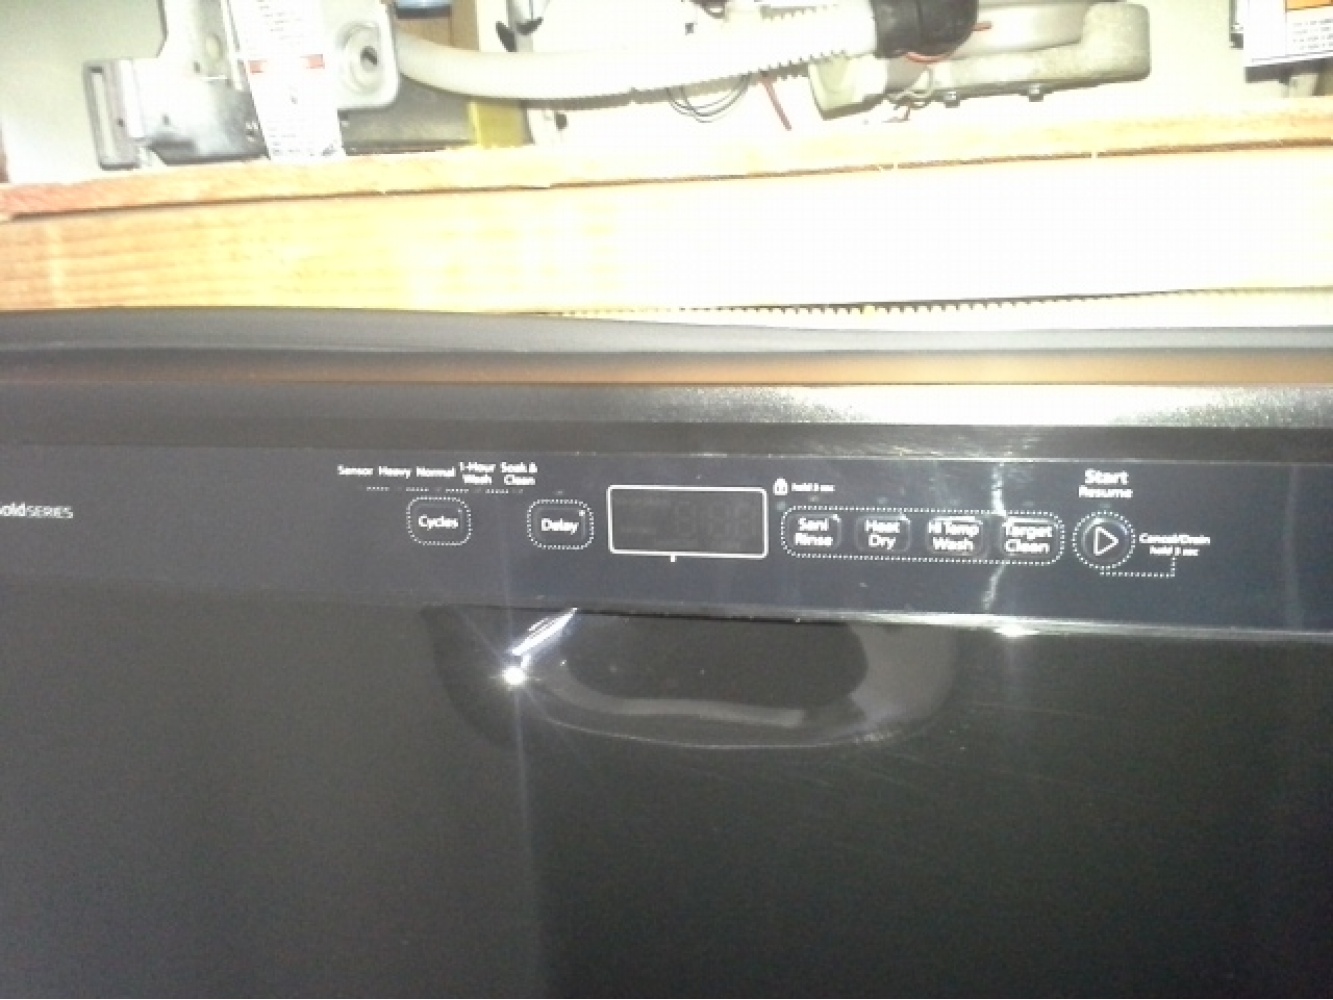 WHIRLPOOL GOLD BLACK DISHWASHER WITH 